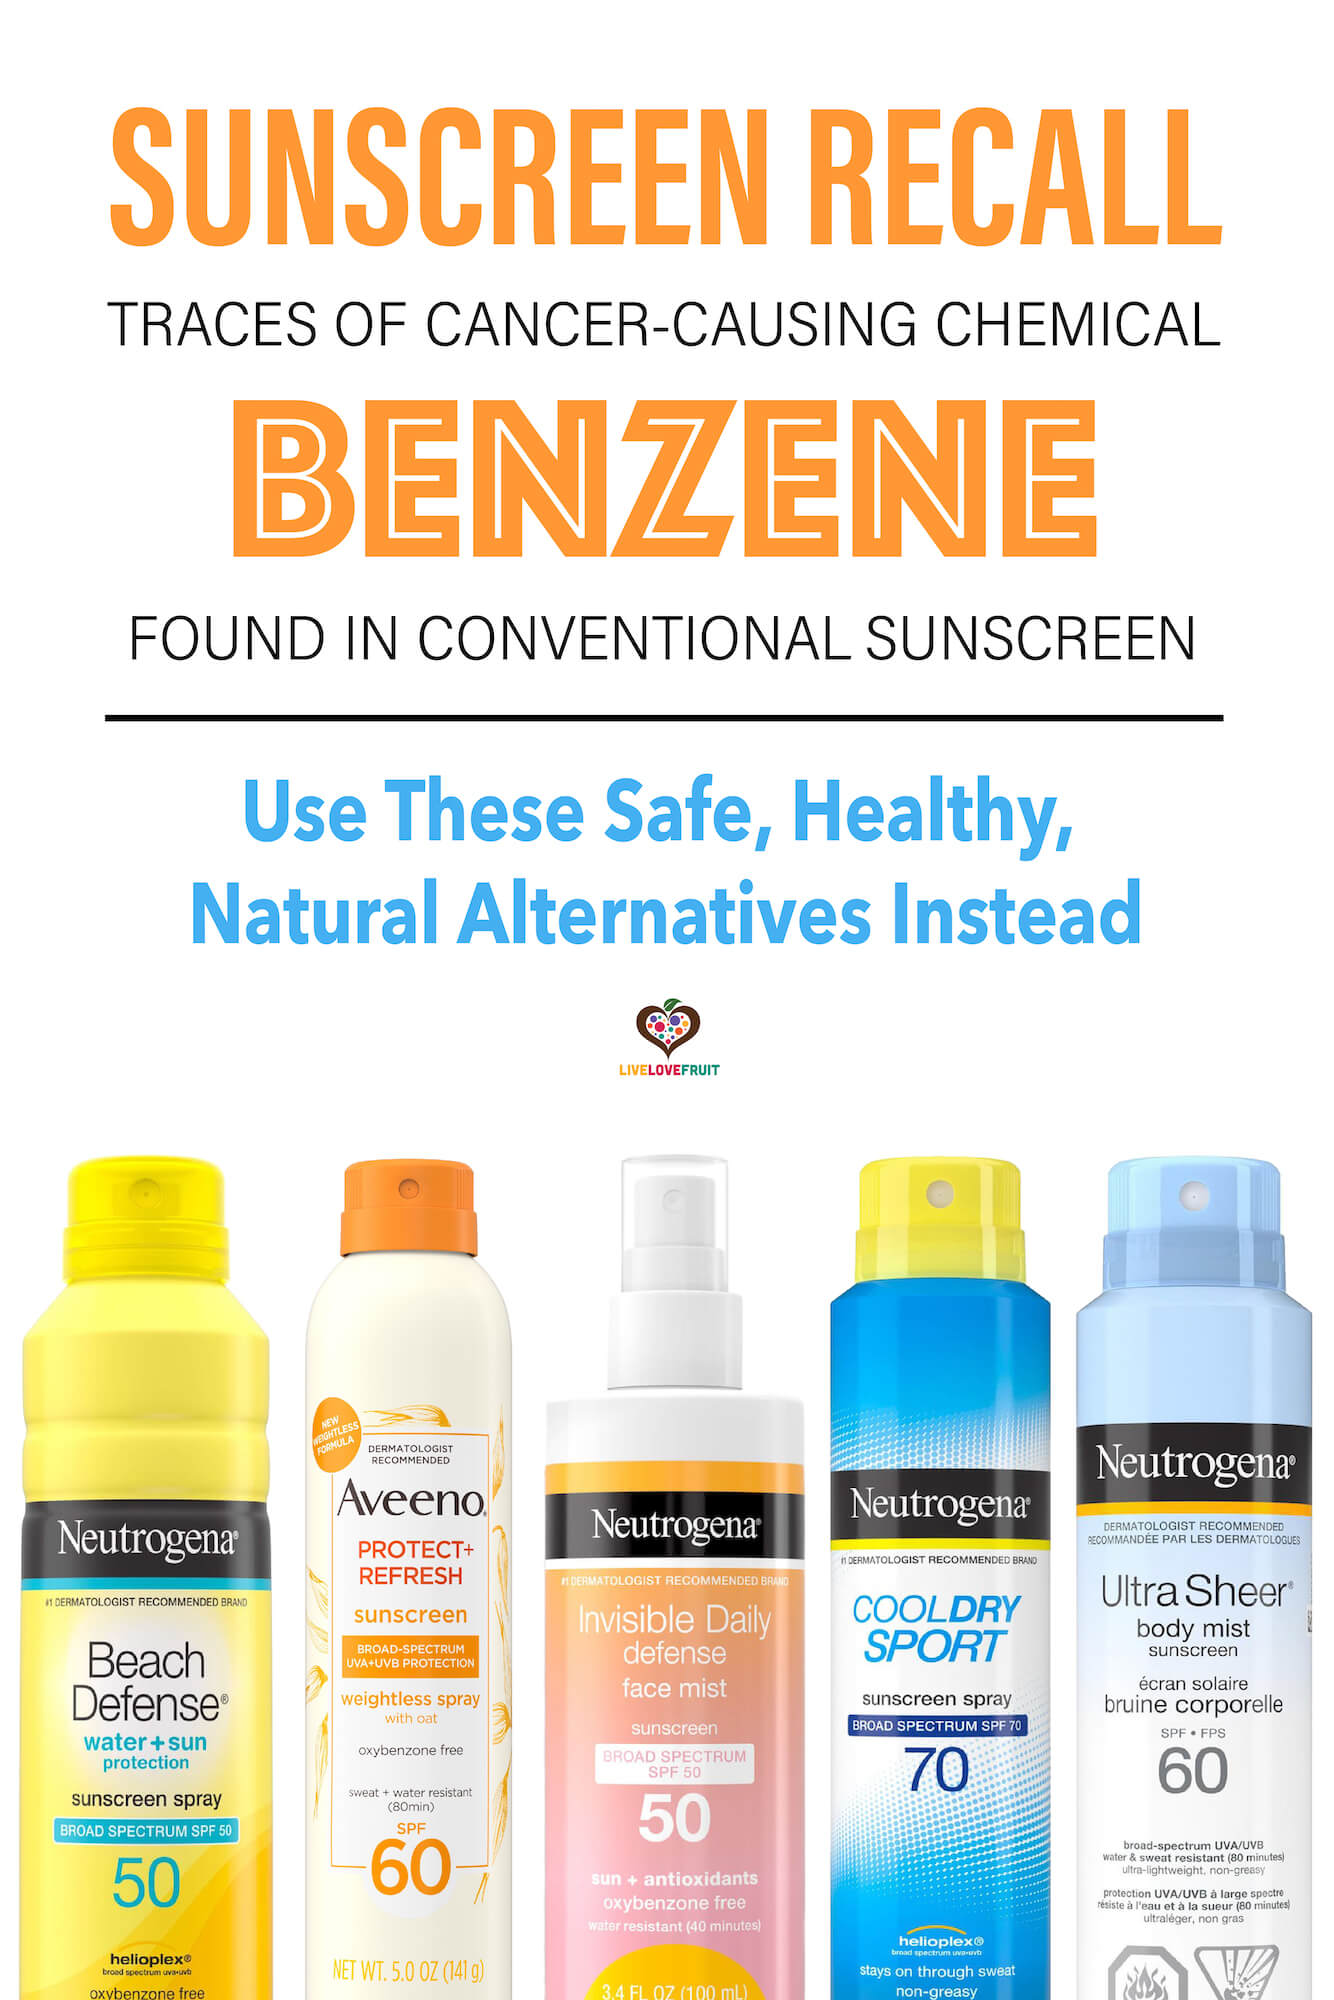 Various sunscreens from Johnson & Johnson that were recalled with text - sunscreen recall: traces of cancer-causing chemical benzene found in conventional sunscreen. Use these safe, healthy, natural alternatives instead